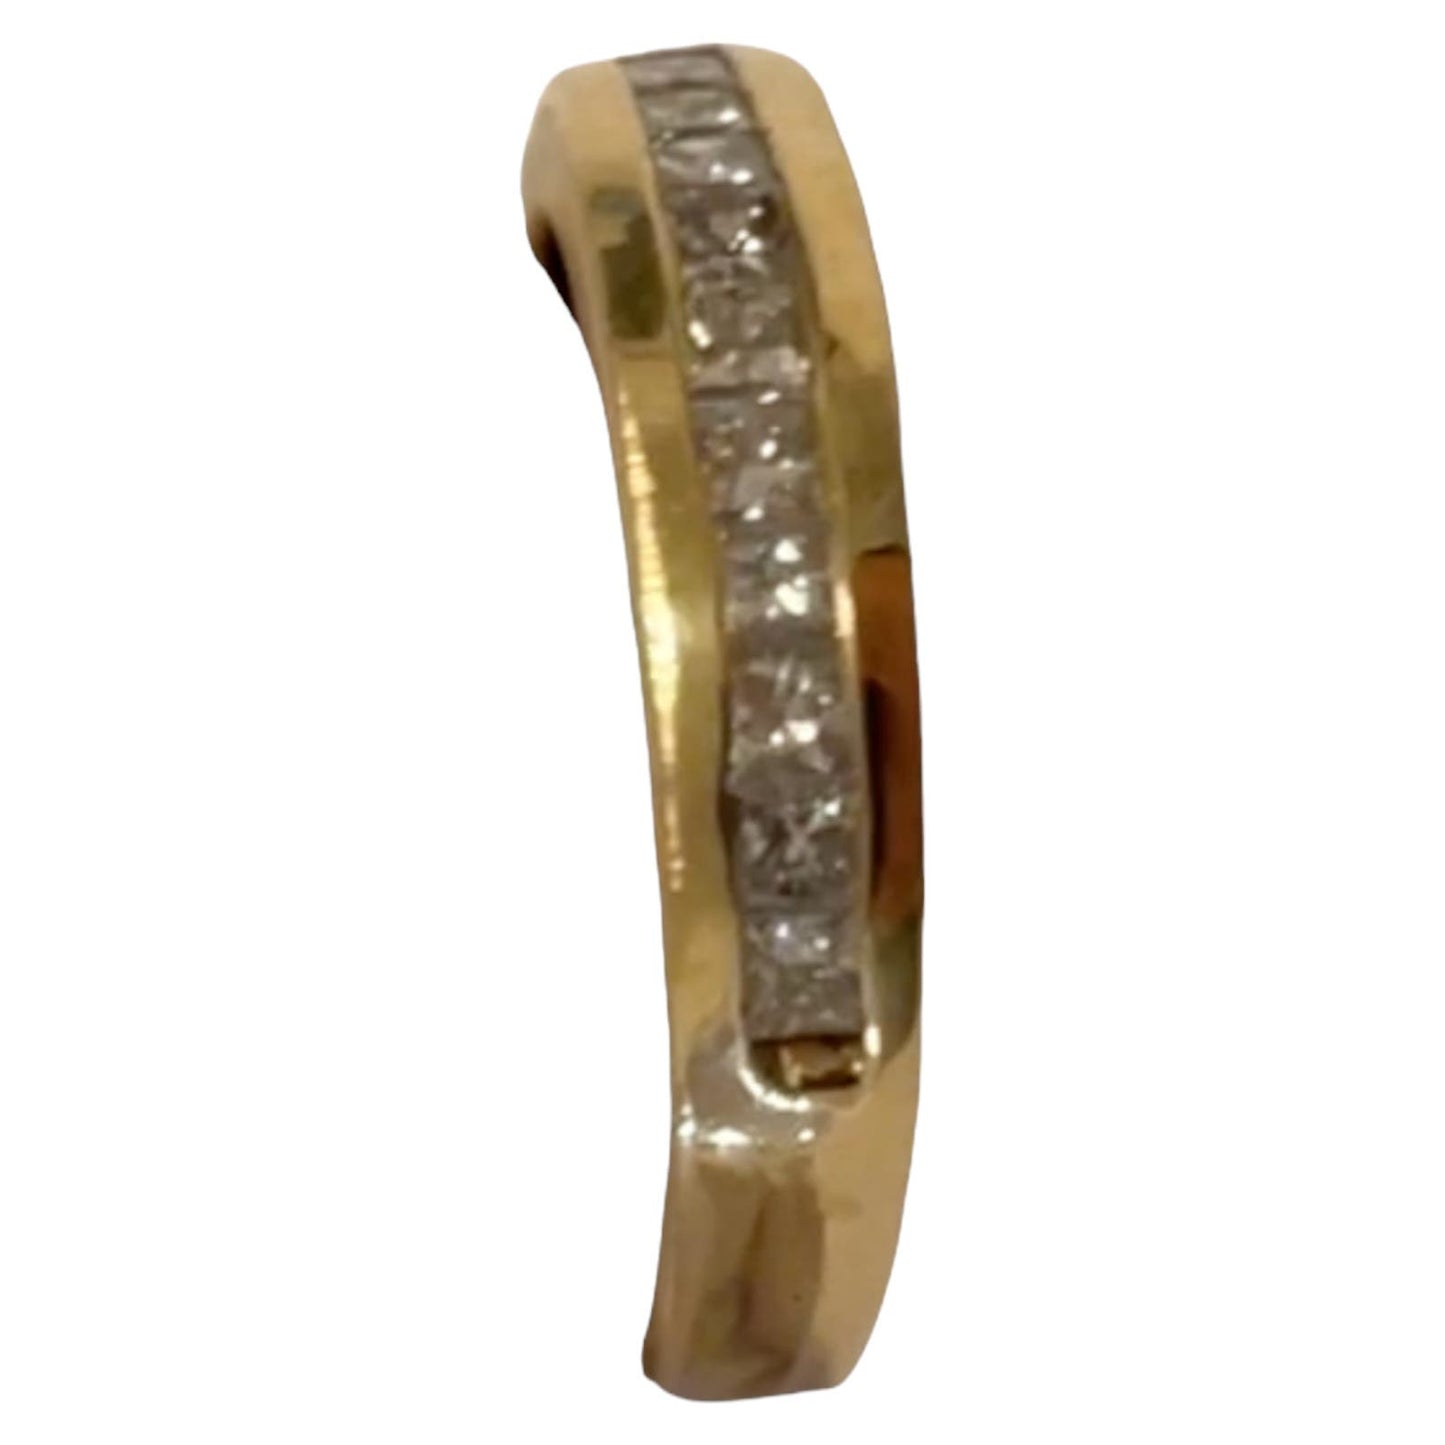 Princess Cut 0.50 Ct Diamond Stackable Ring in 14K Yellow Gold Handmade - Size 7